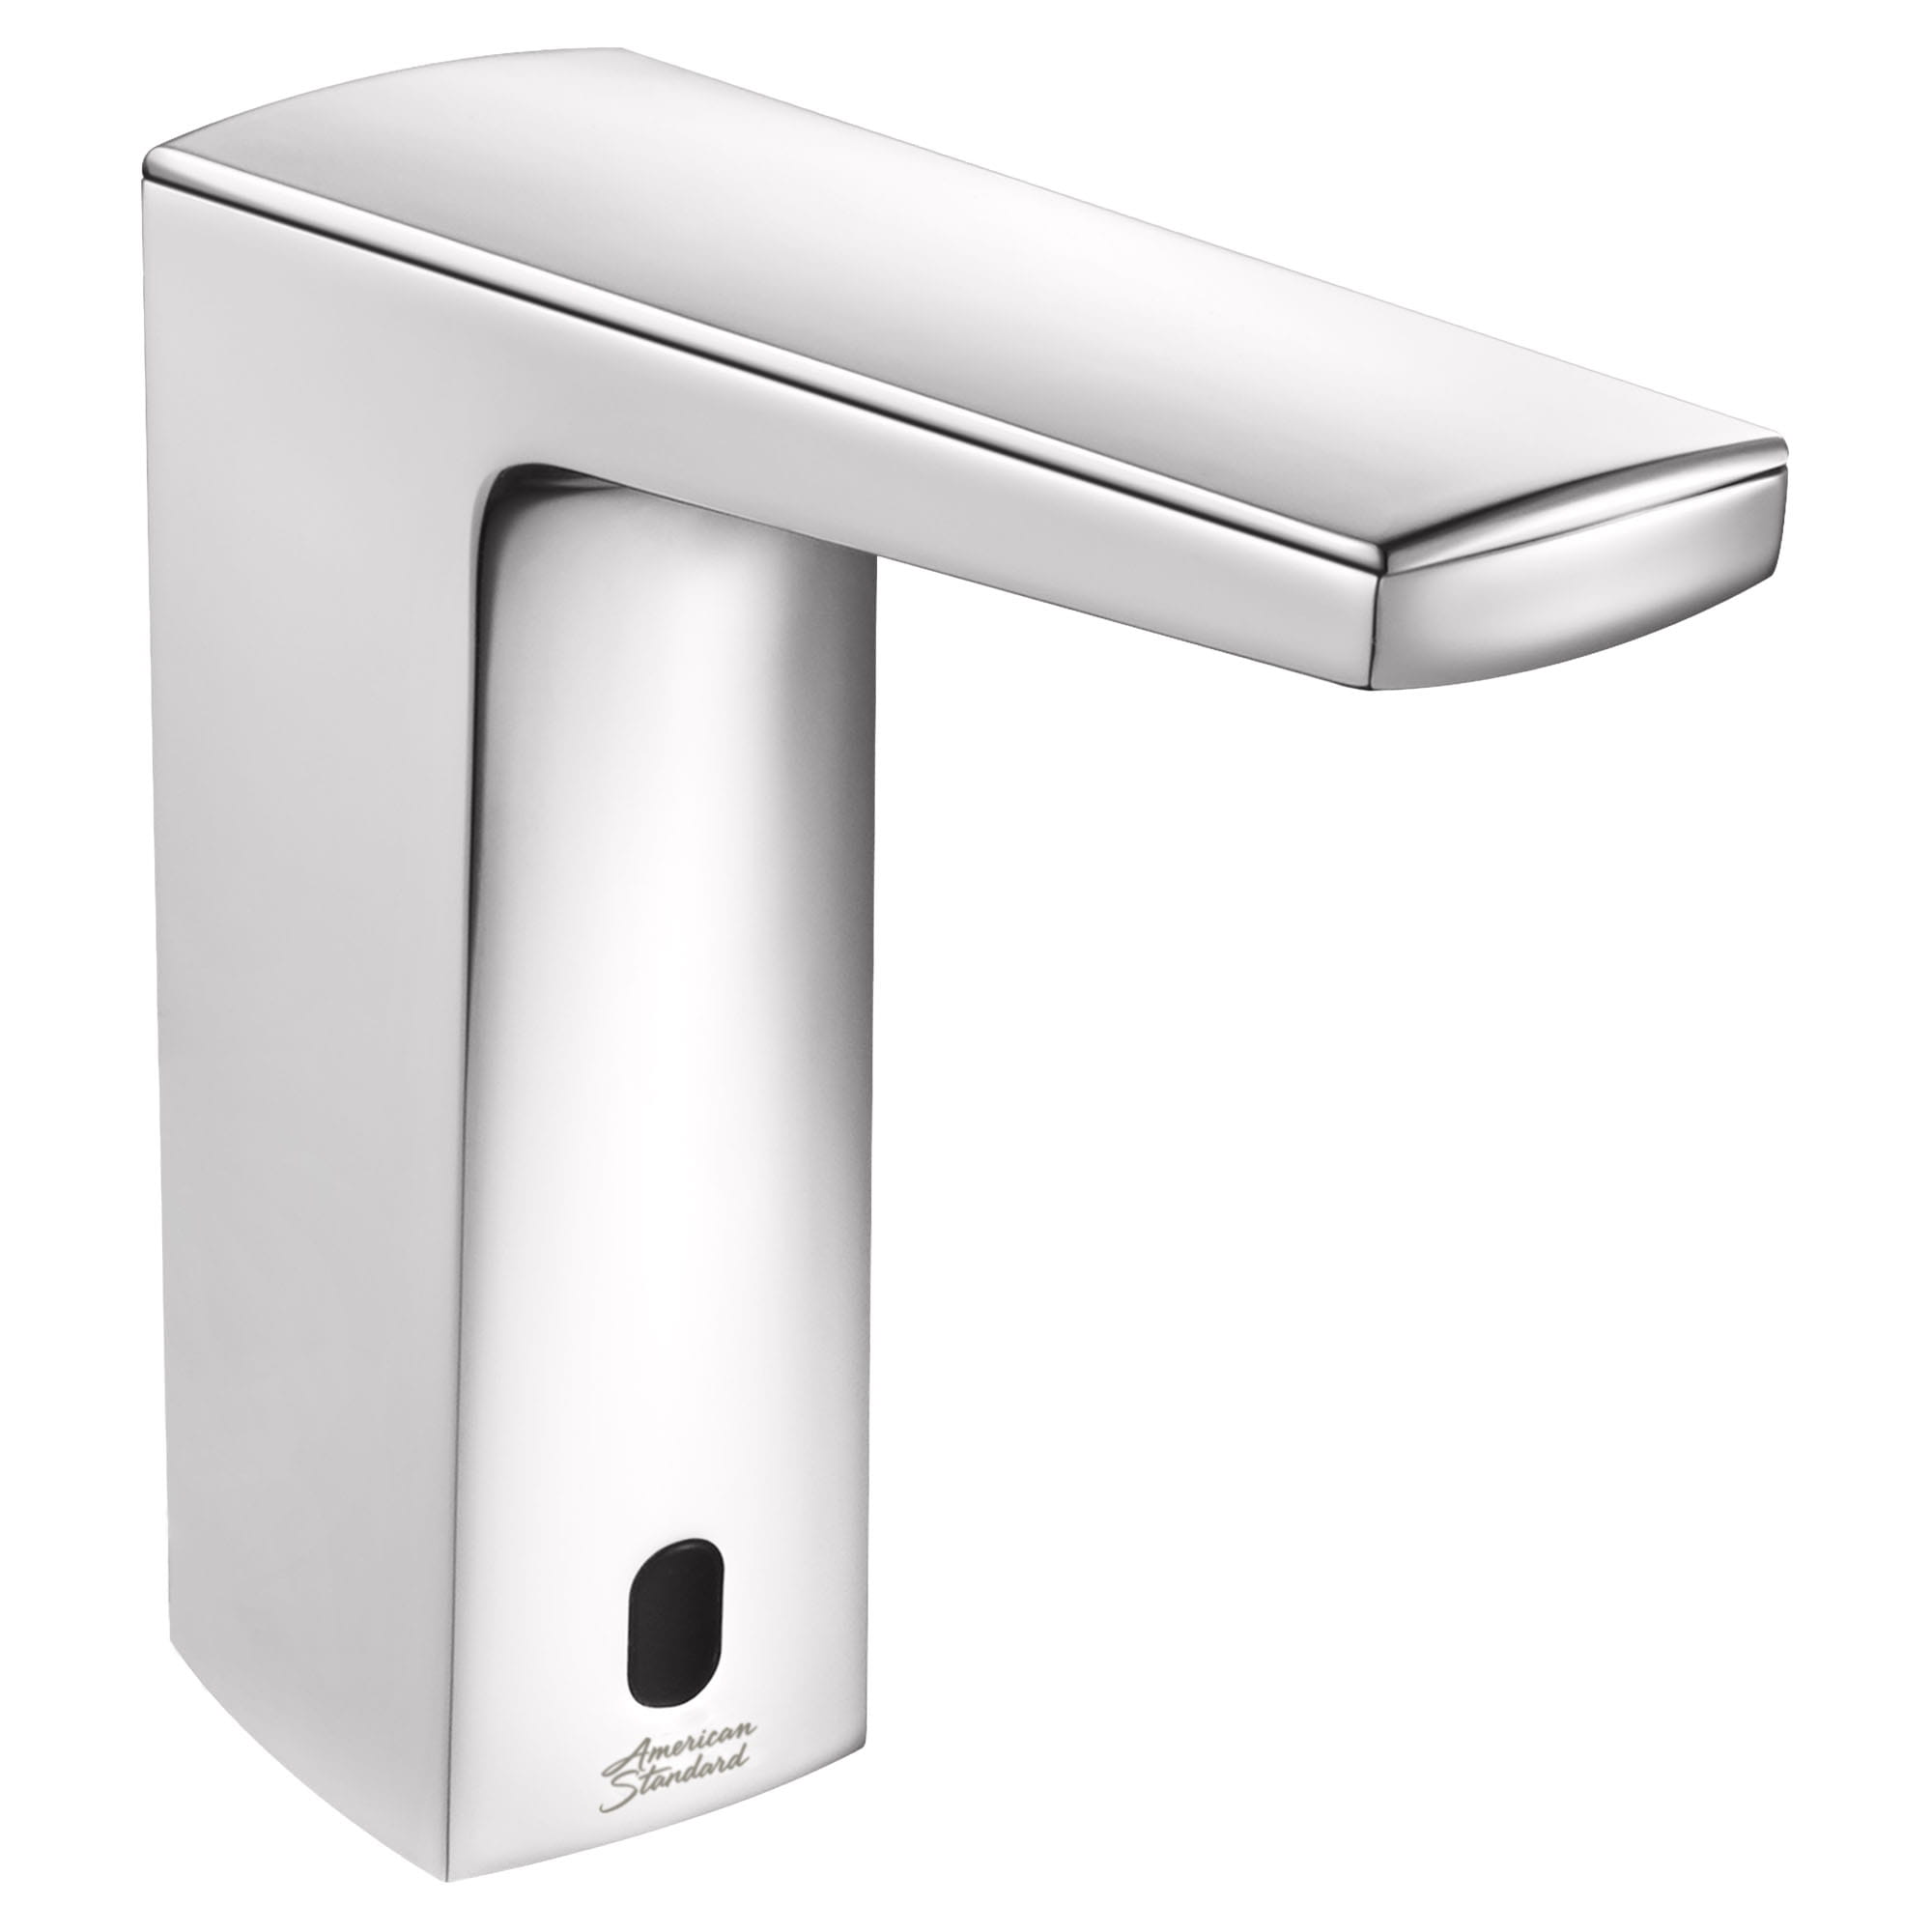 Paradigm Selectronic Touchless Faucet Battery Powered With SmarTherm Safety Shut Off  Plus  ADM 15 gpm 57 Lpm CHROME